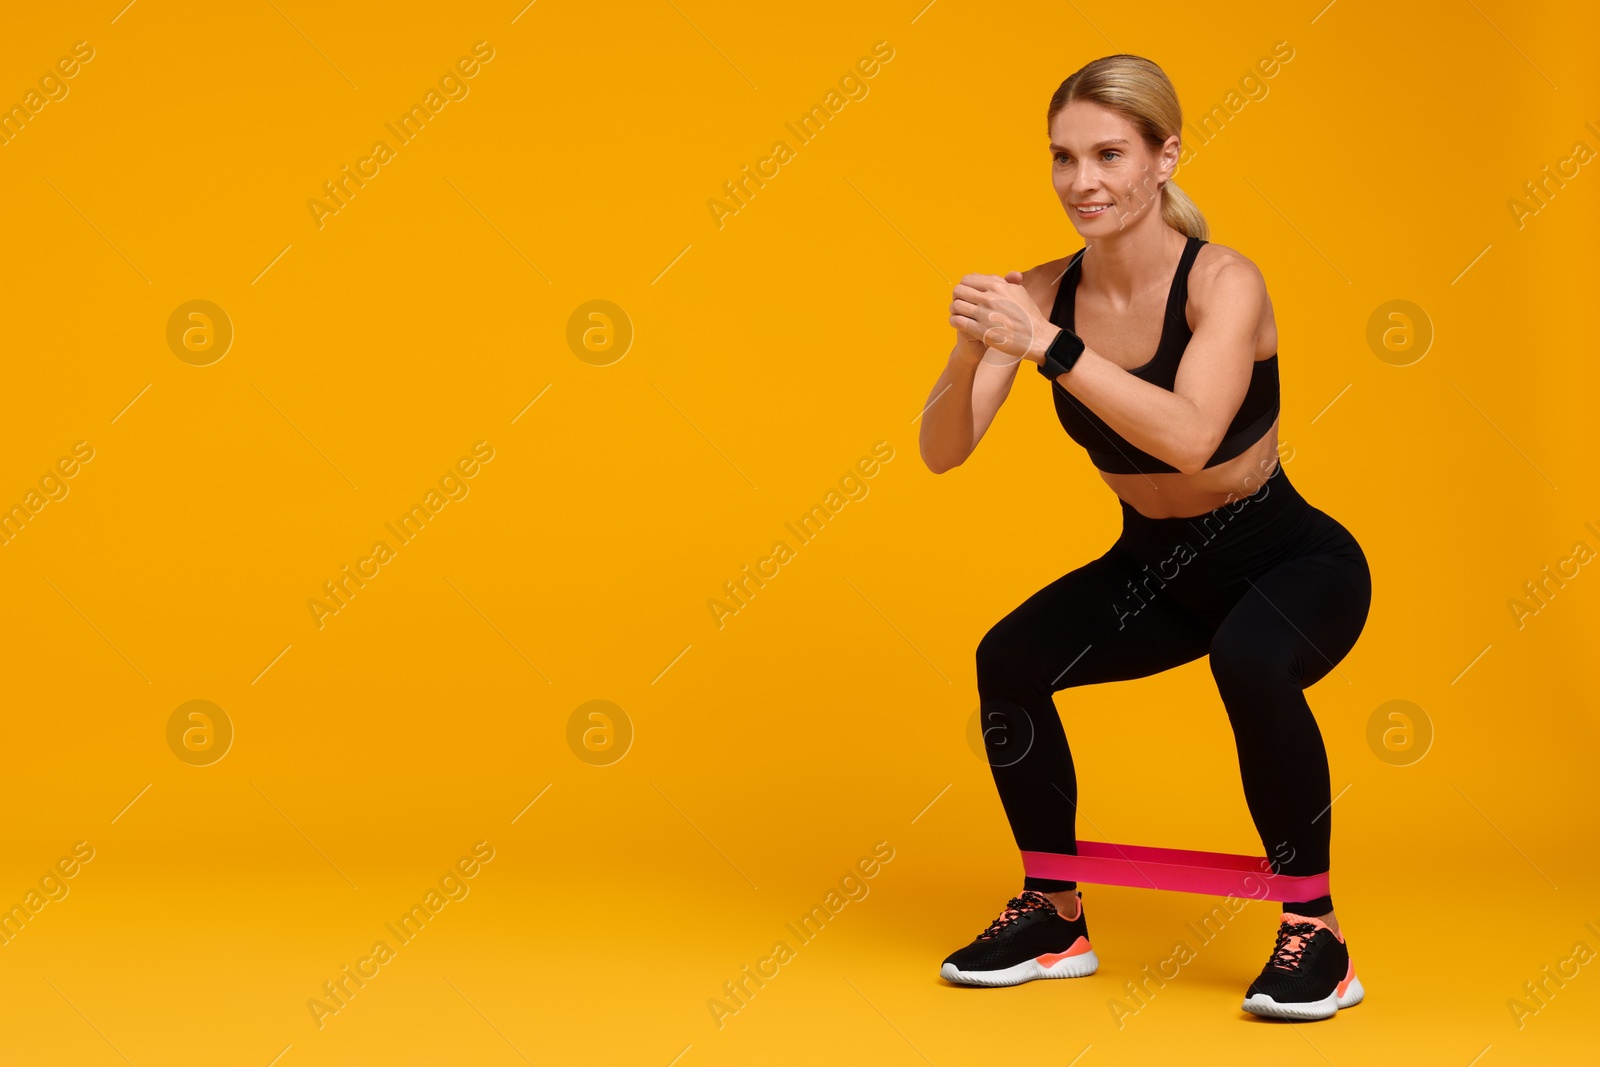 Photo of Woman exercising with elastic resistance band on orange background. Space for text